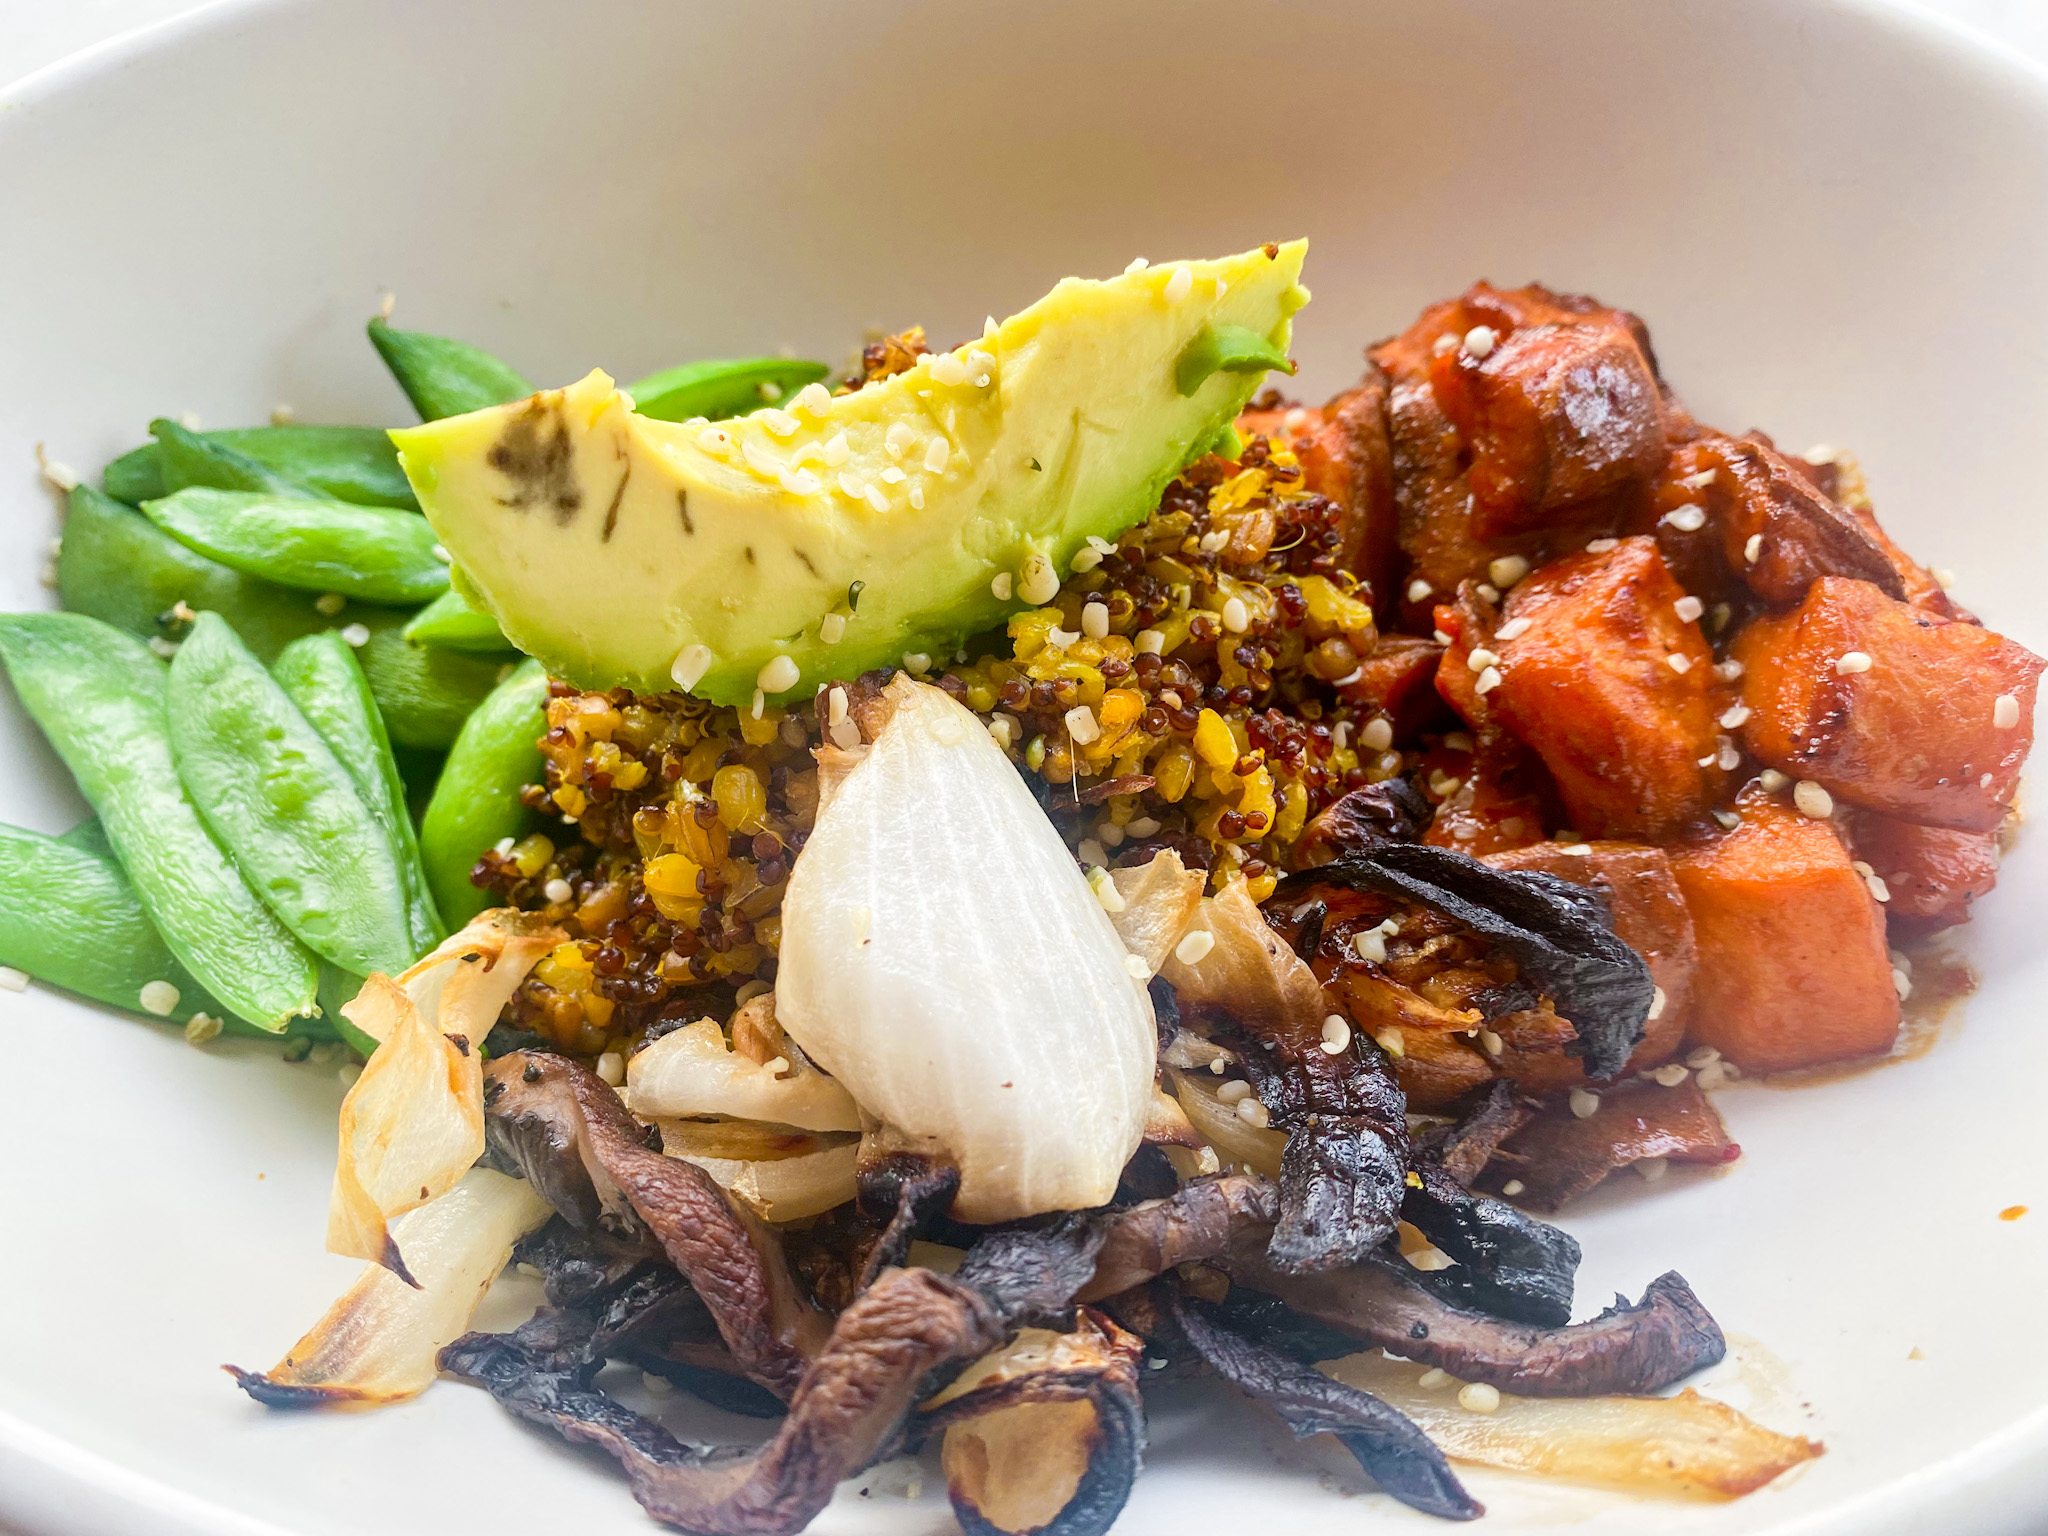 plate of vegetables, grains, and avocado